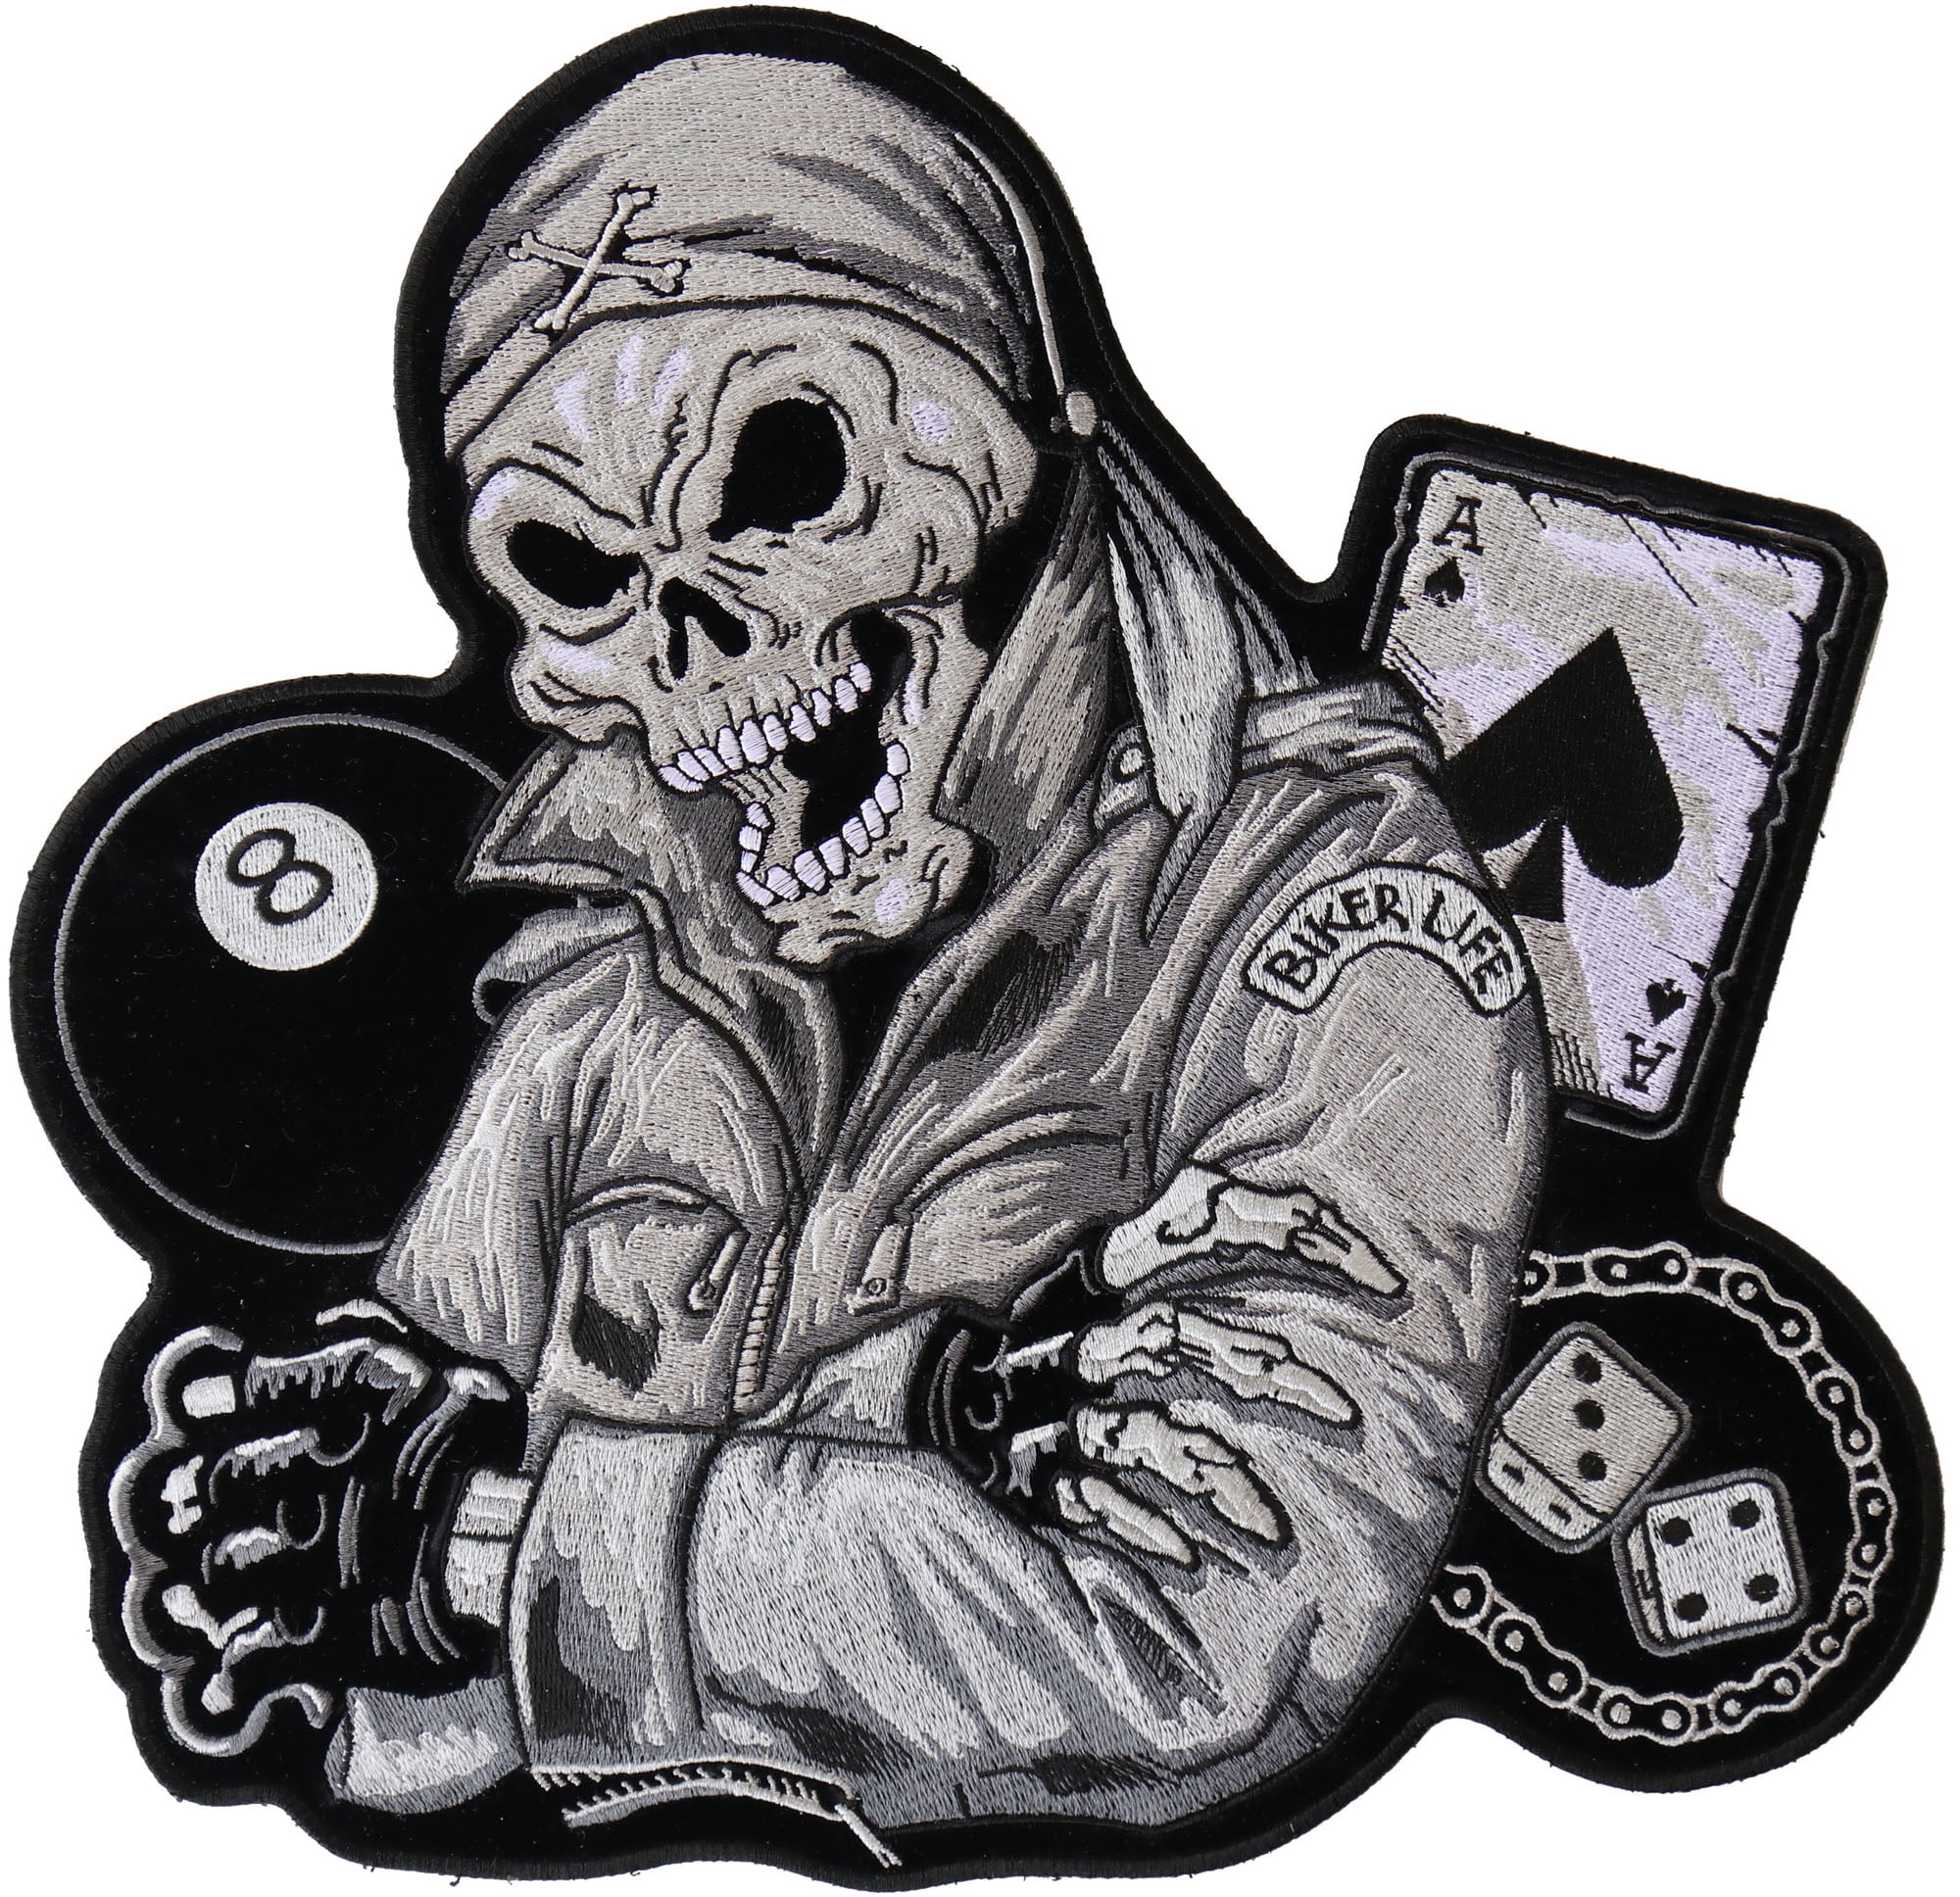 Skull Iron On Patch on Clothes, Gothic Goth Patches, Clothing